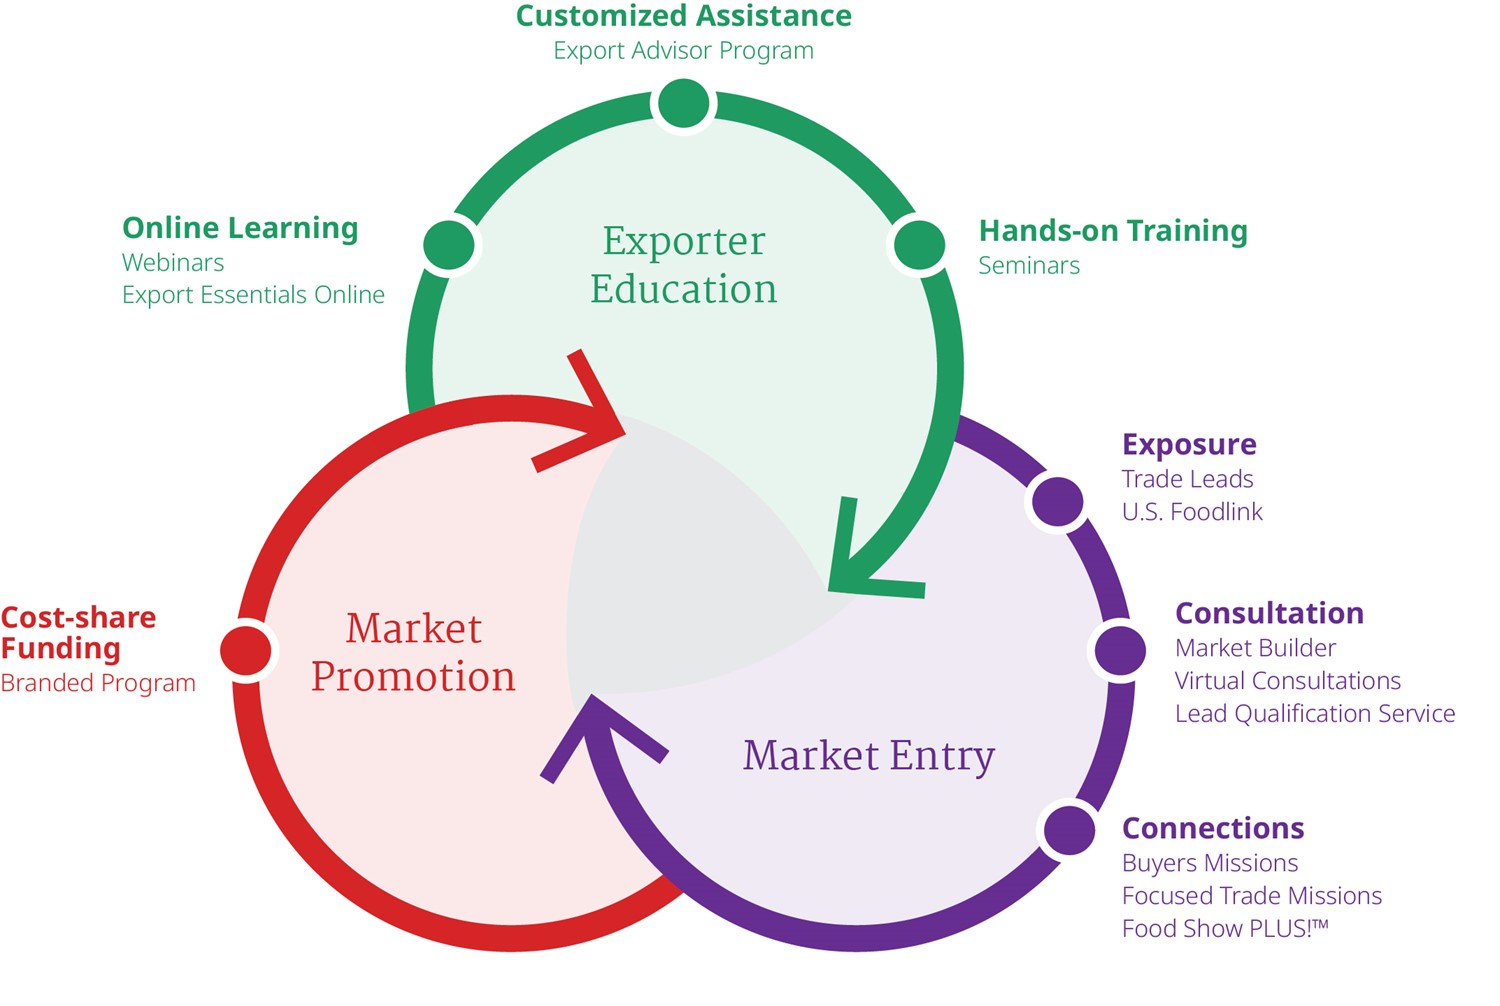 Food Export's programs include Exporter Education, Market Entry, and Market Promotion